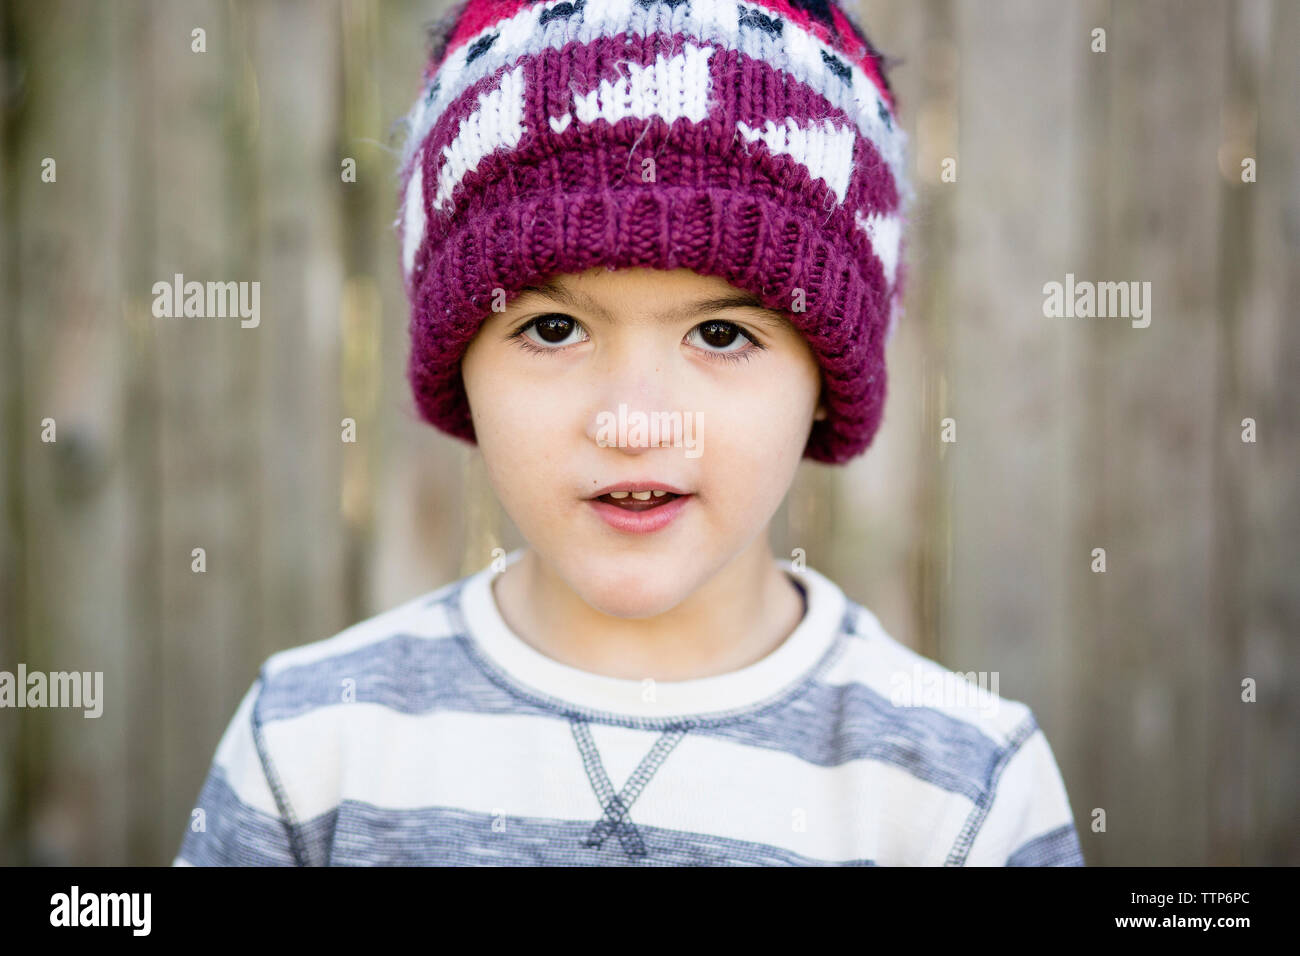 Close-up portrait of cute boy wearing knit hat while standing against fence in yard Stock Photo